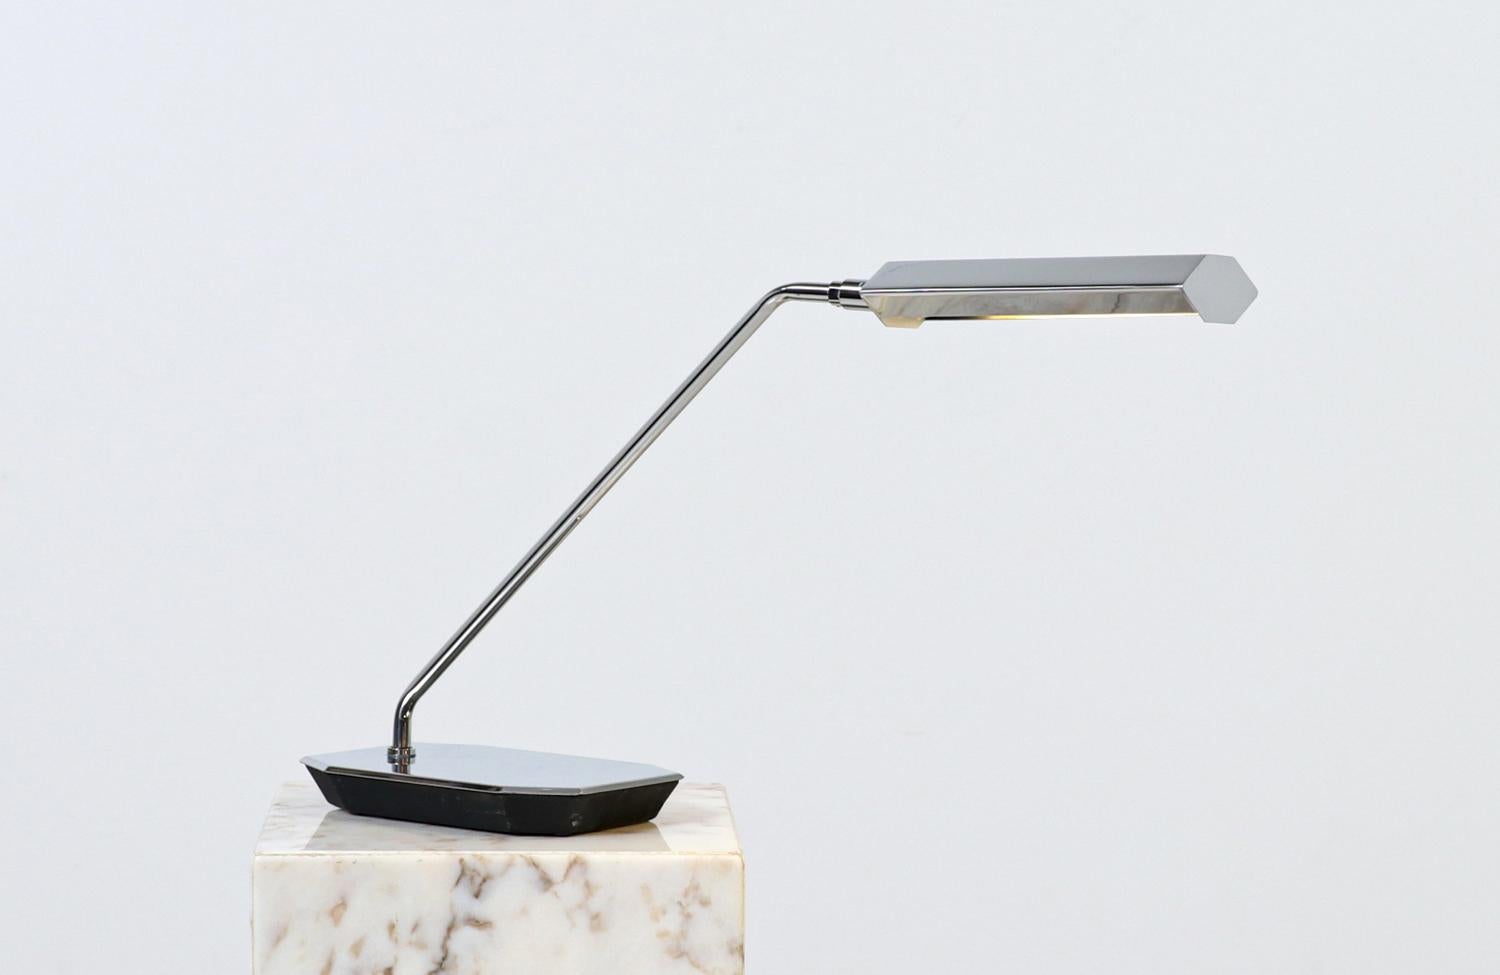 Mid-Century Modern chrome table lamp by Koch & Lowy.

________________________________________

Transforming a piece of Mid-Century Modern furniture is like bringing history back to life, and we take this journey with passion and precision. With